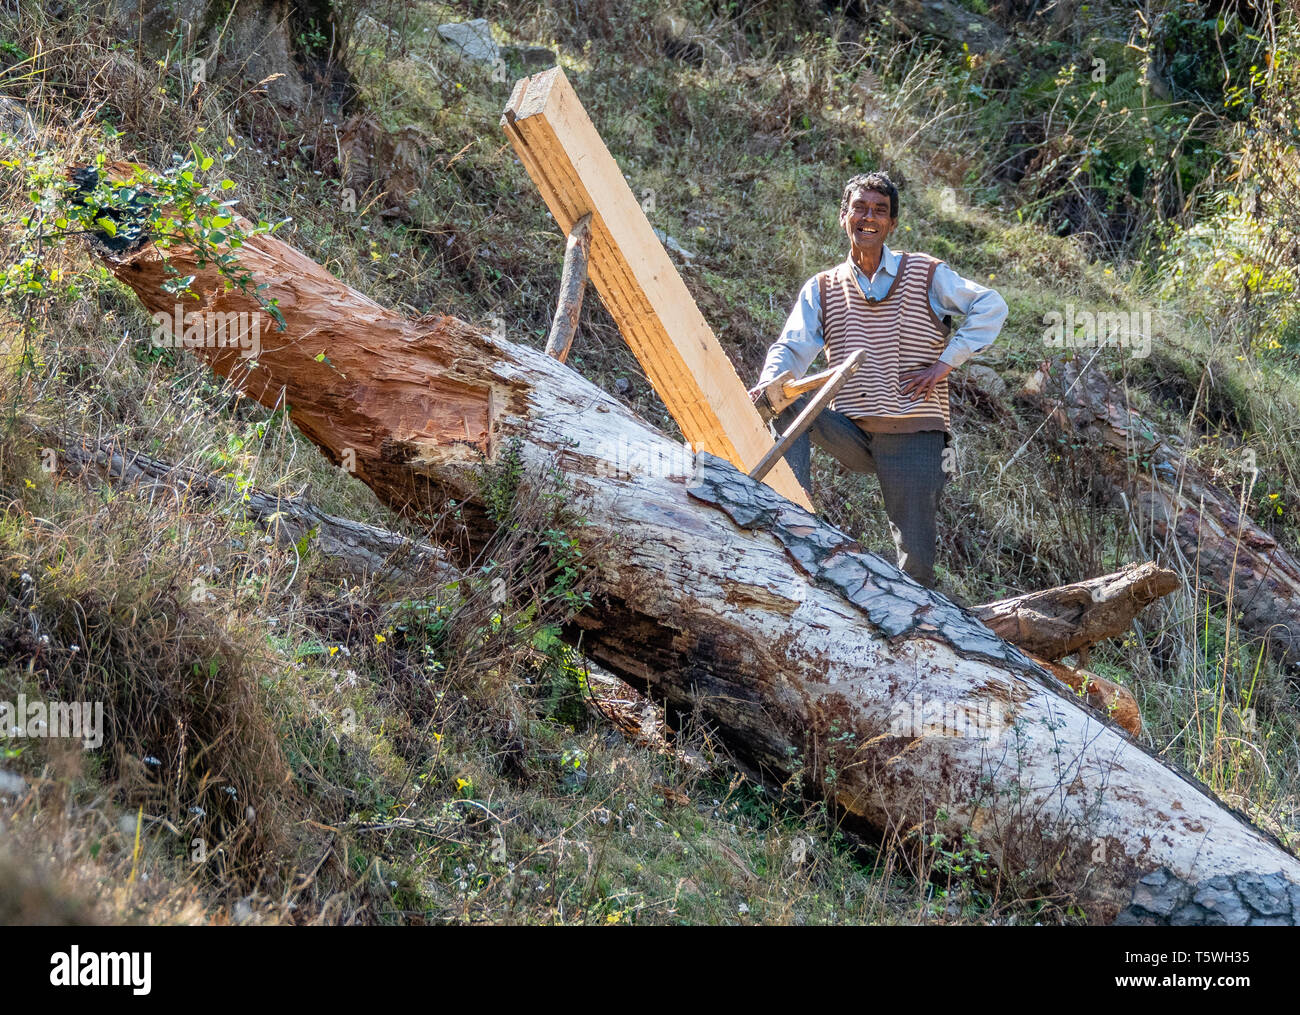 Happy smiling man sawing floorboards by hand from a felled forest tree in the Binsar valley of Uttarakhand Northern India Stock Photo